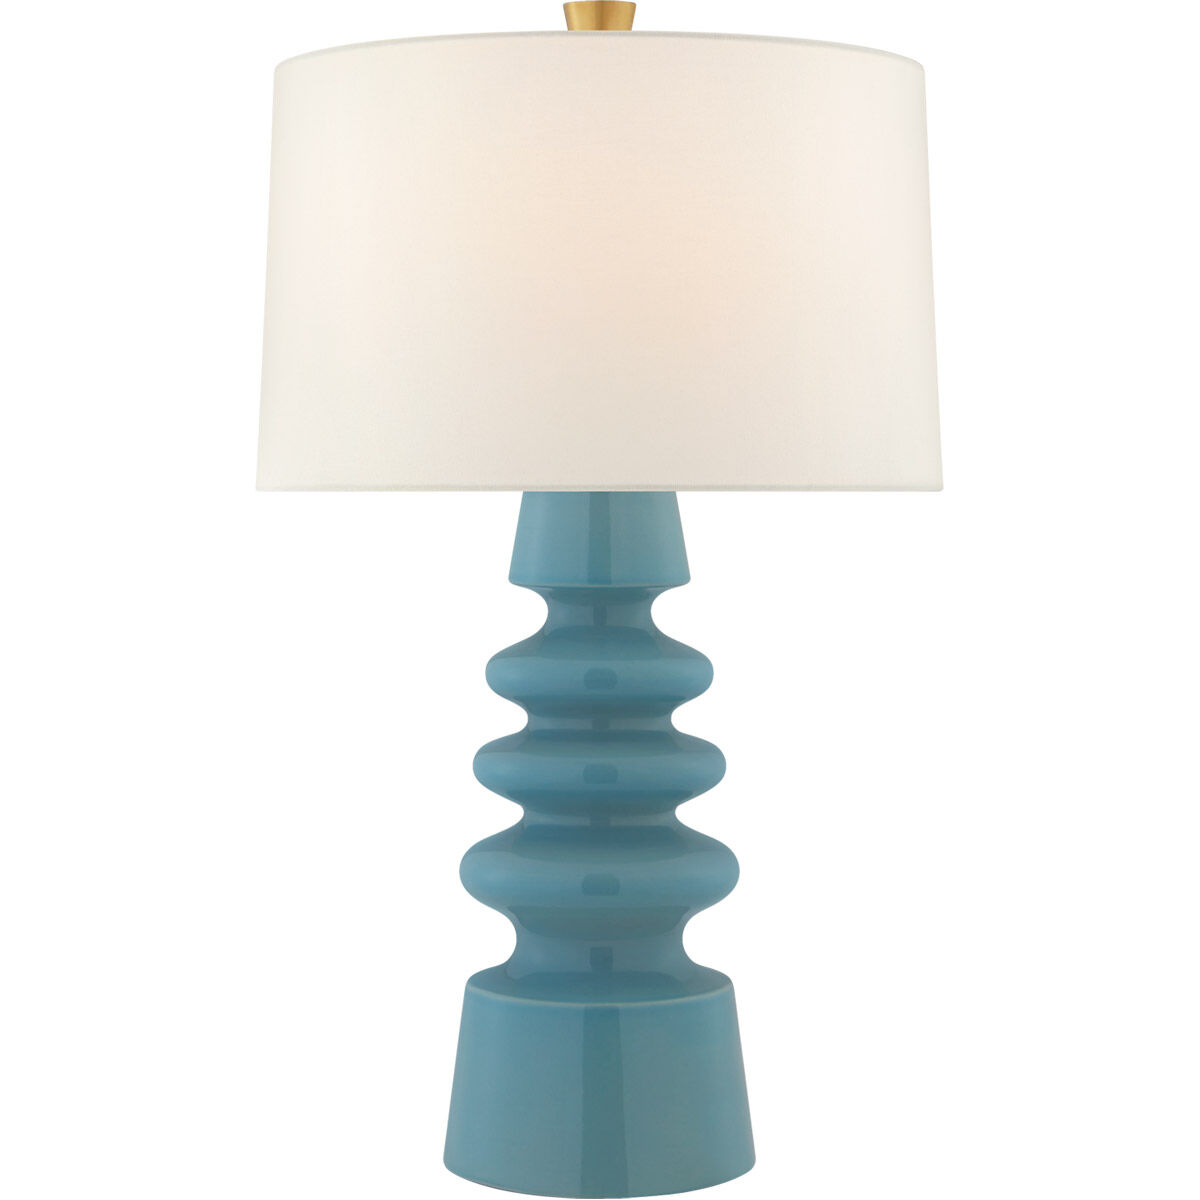 Julie Neill Andreas Table Lamp